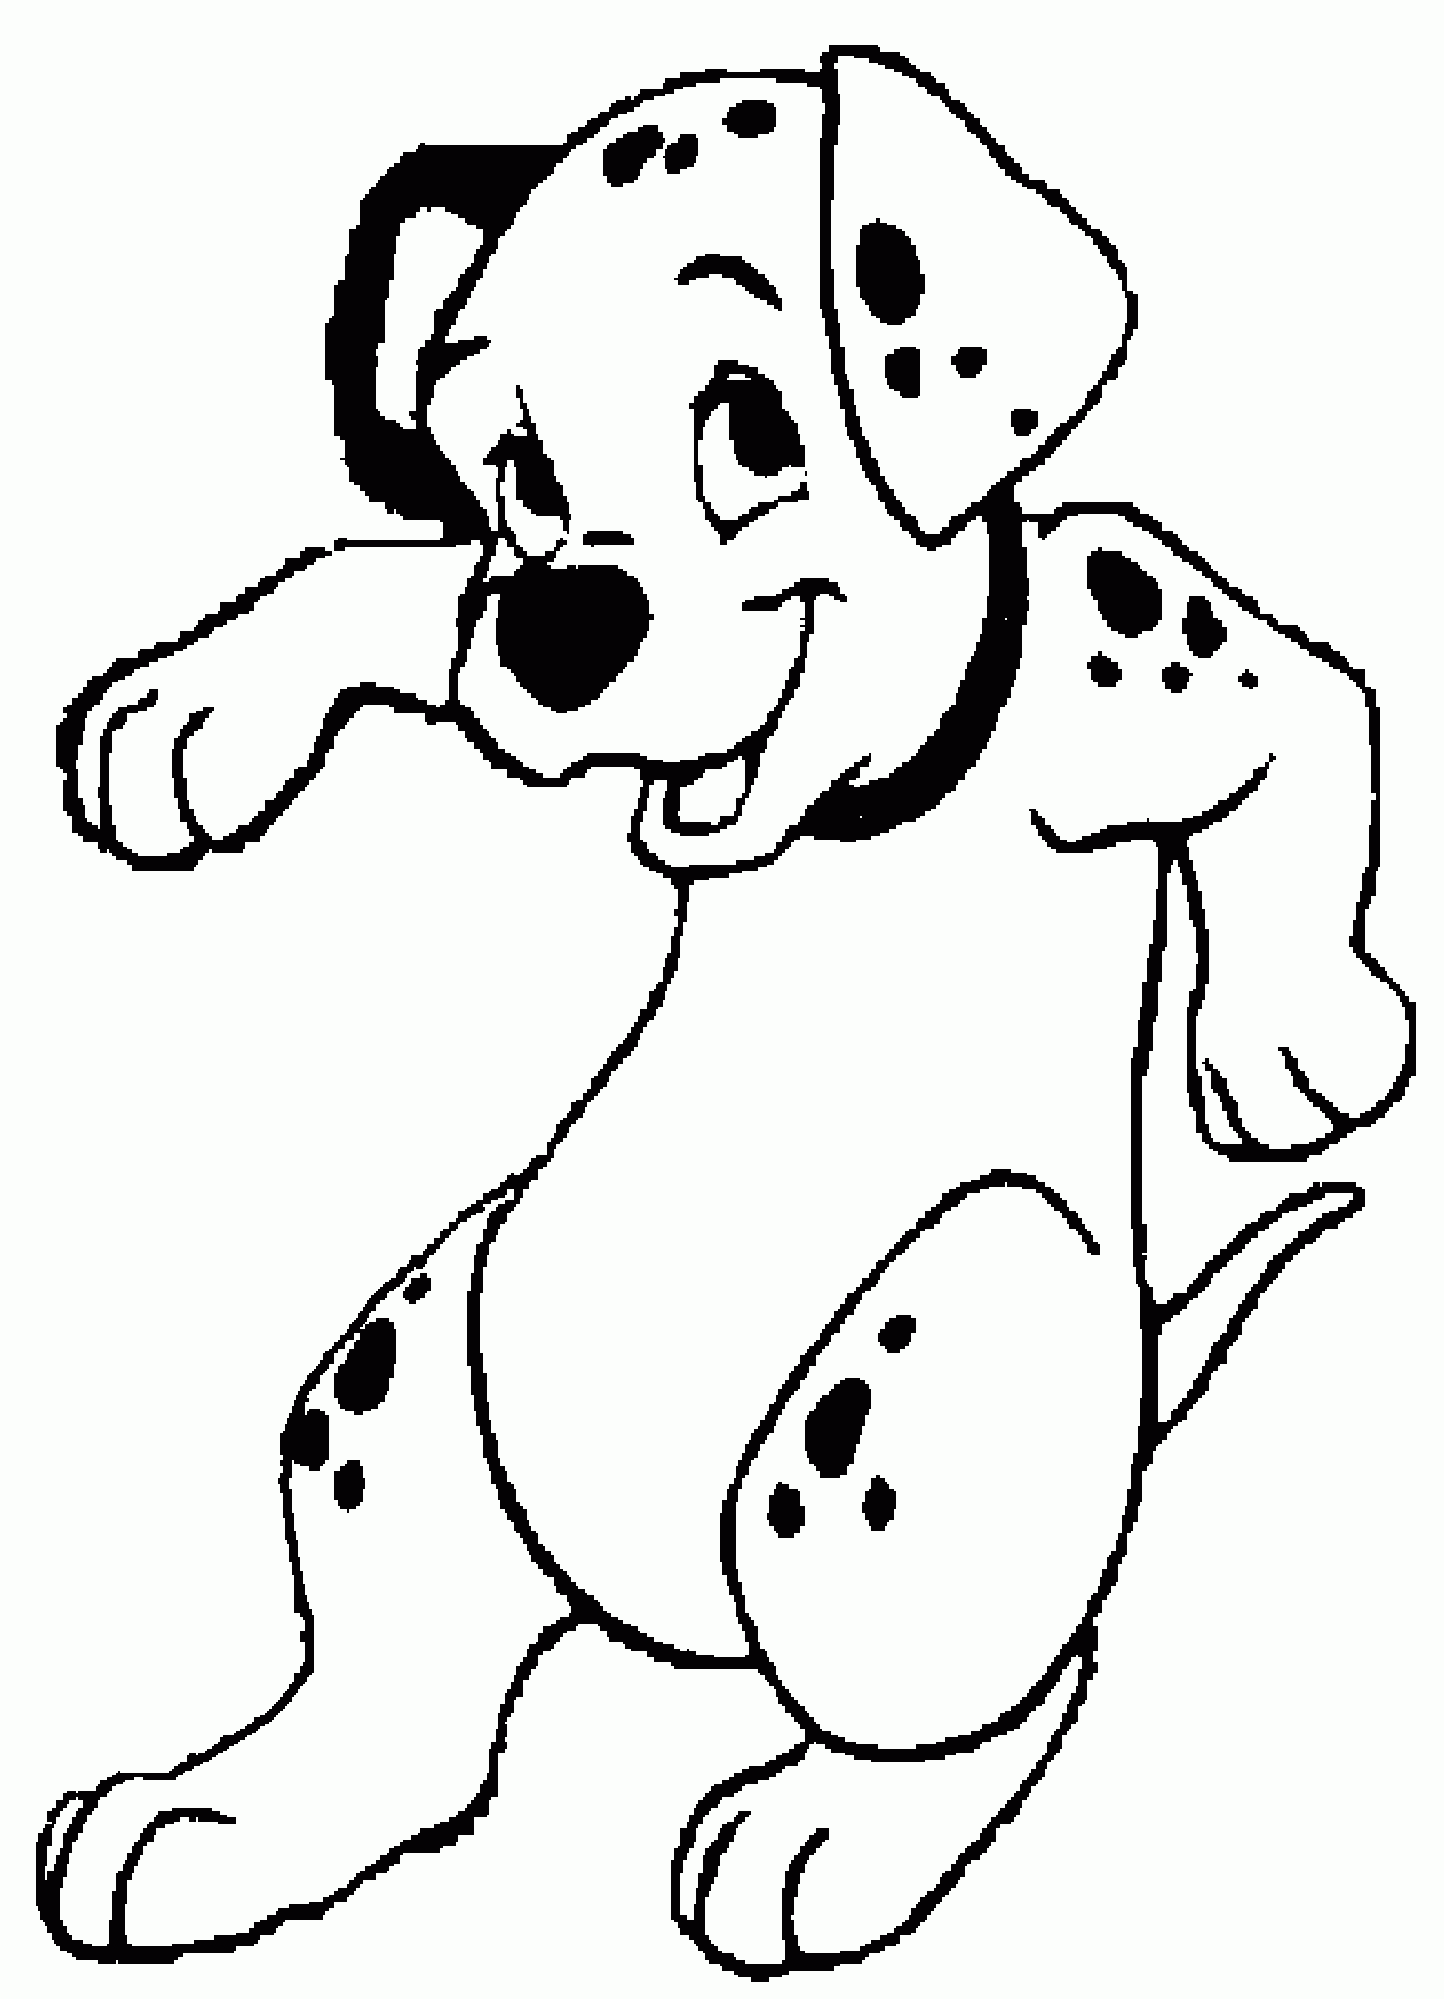 Coloring Pages For 101 Dalmatians - Free coloring pages